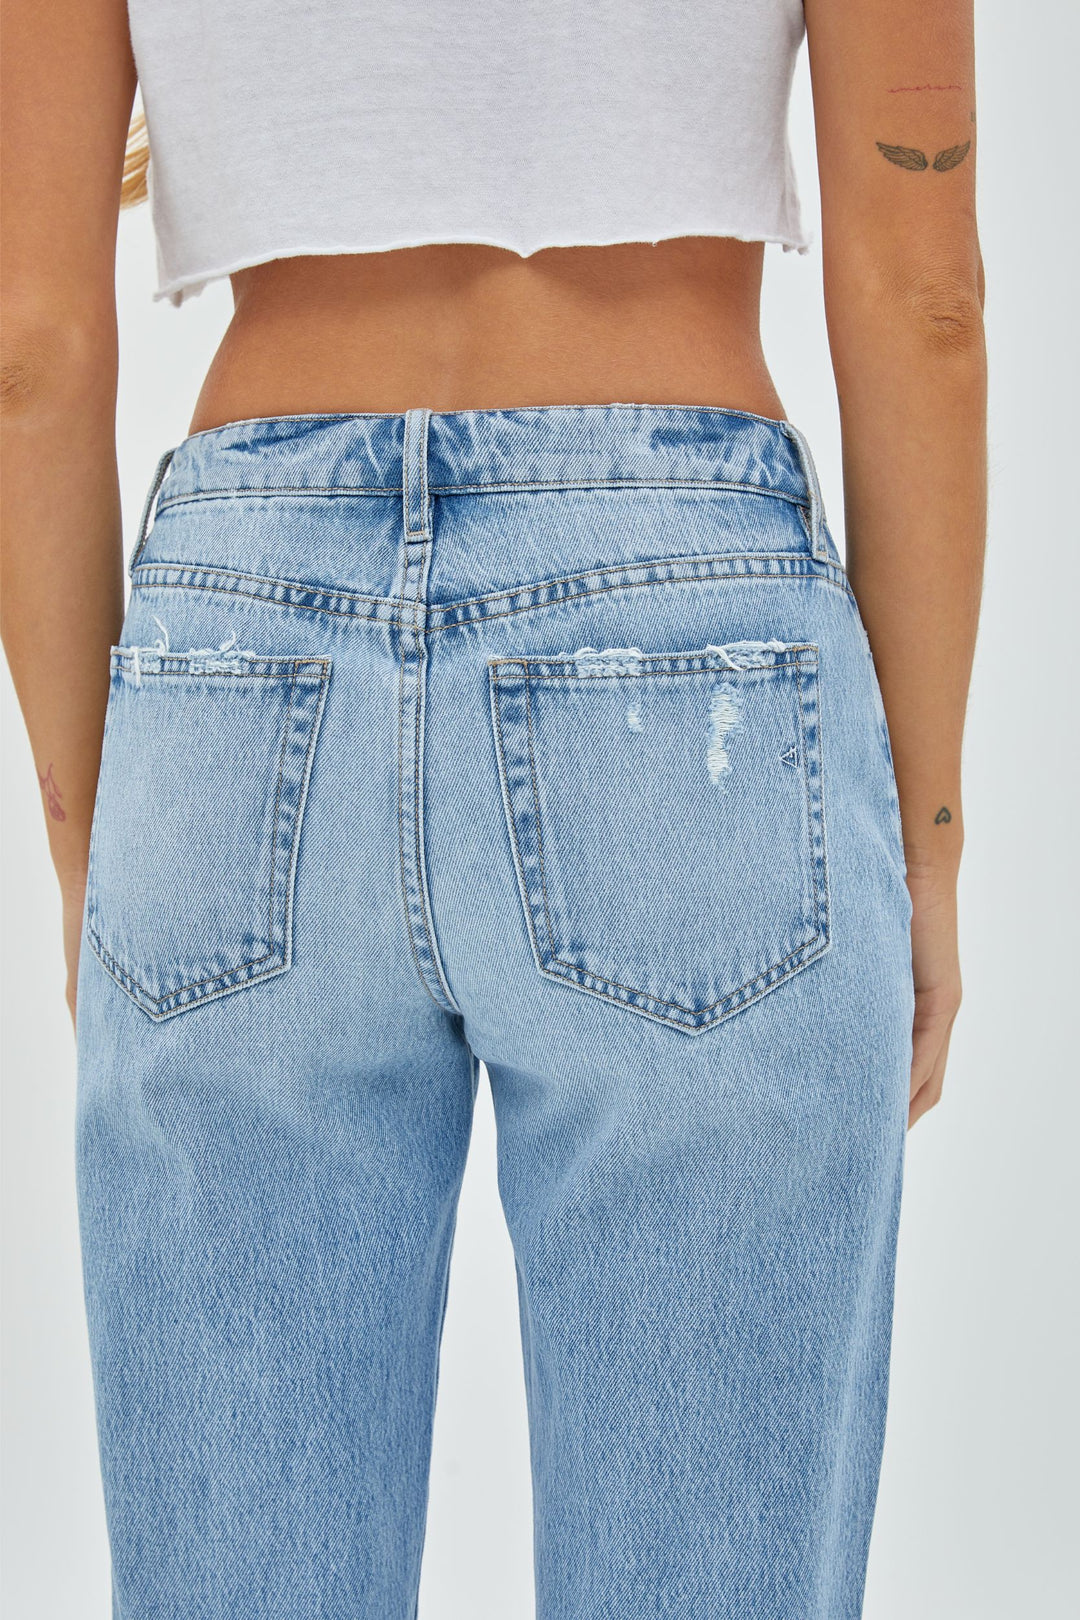 Hidden Jeans Tracey High Rise Straight Jean - Light Wash